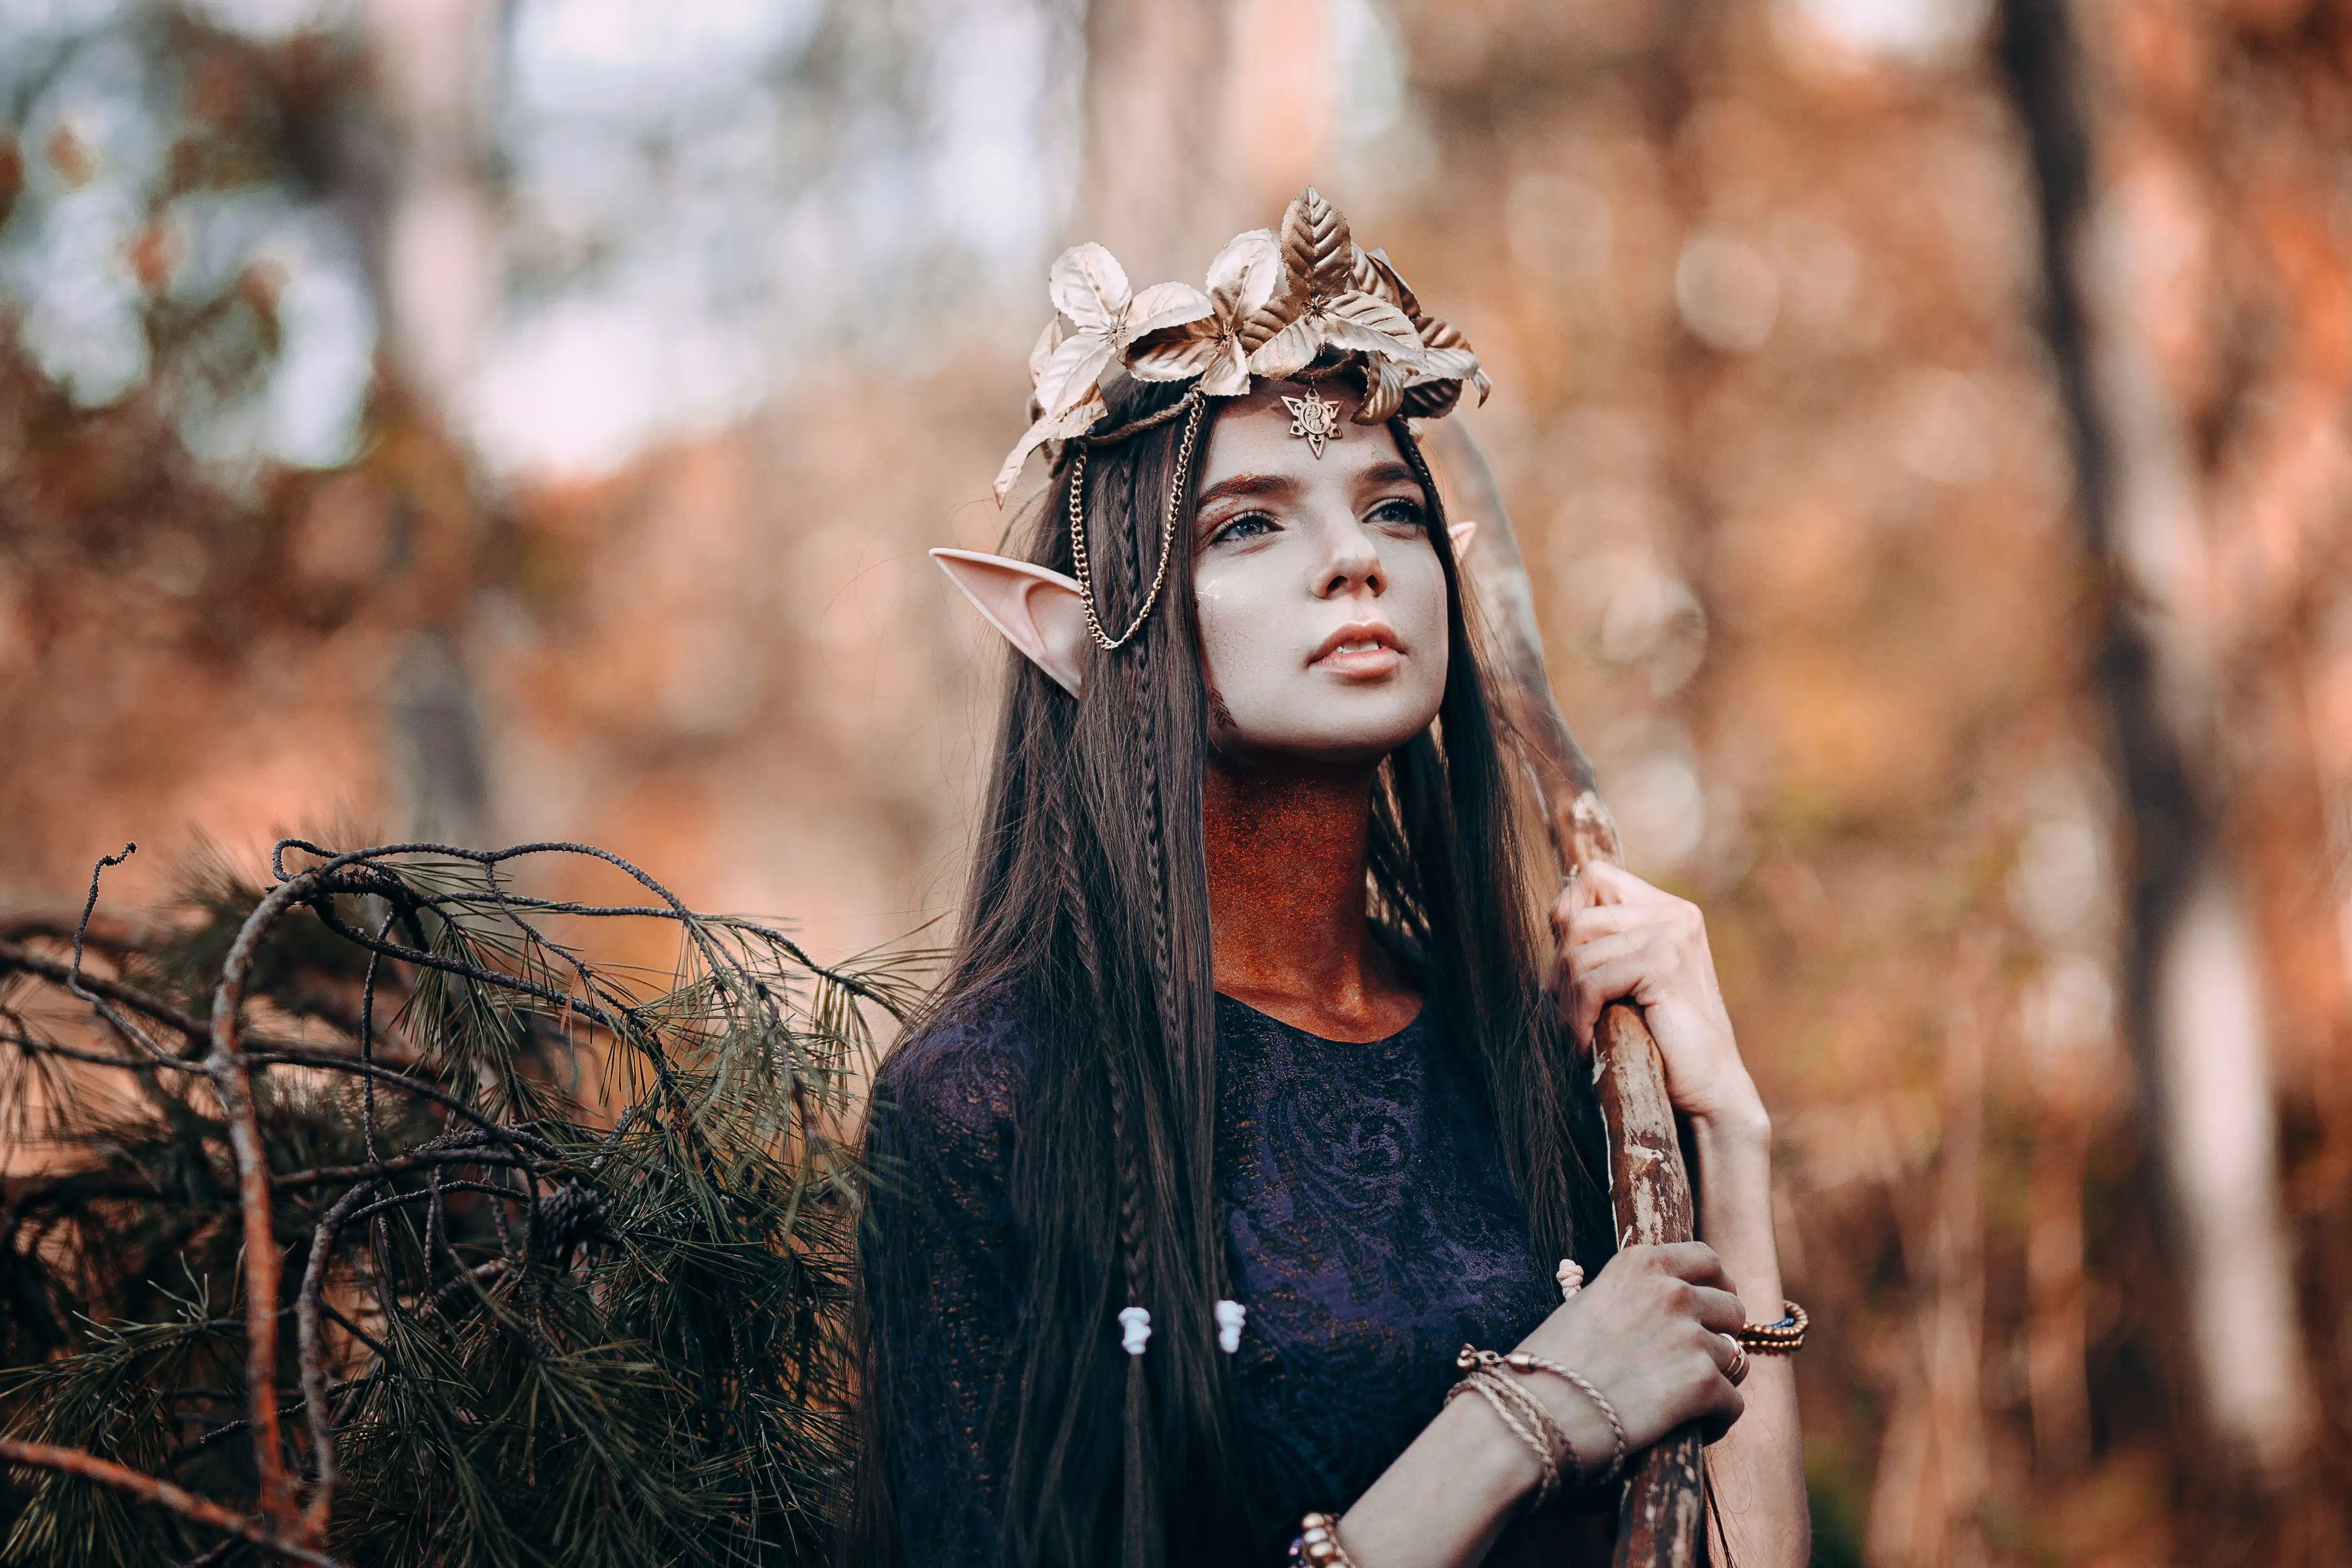 beautiful elf woman fabulous, fairy forest, famtasy young woman with long ears, long dark hair golden wreath crown on head